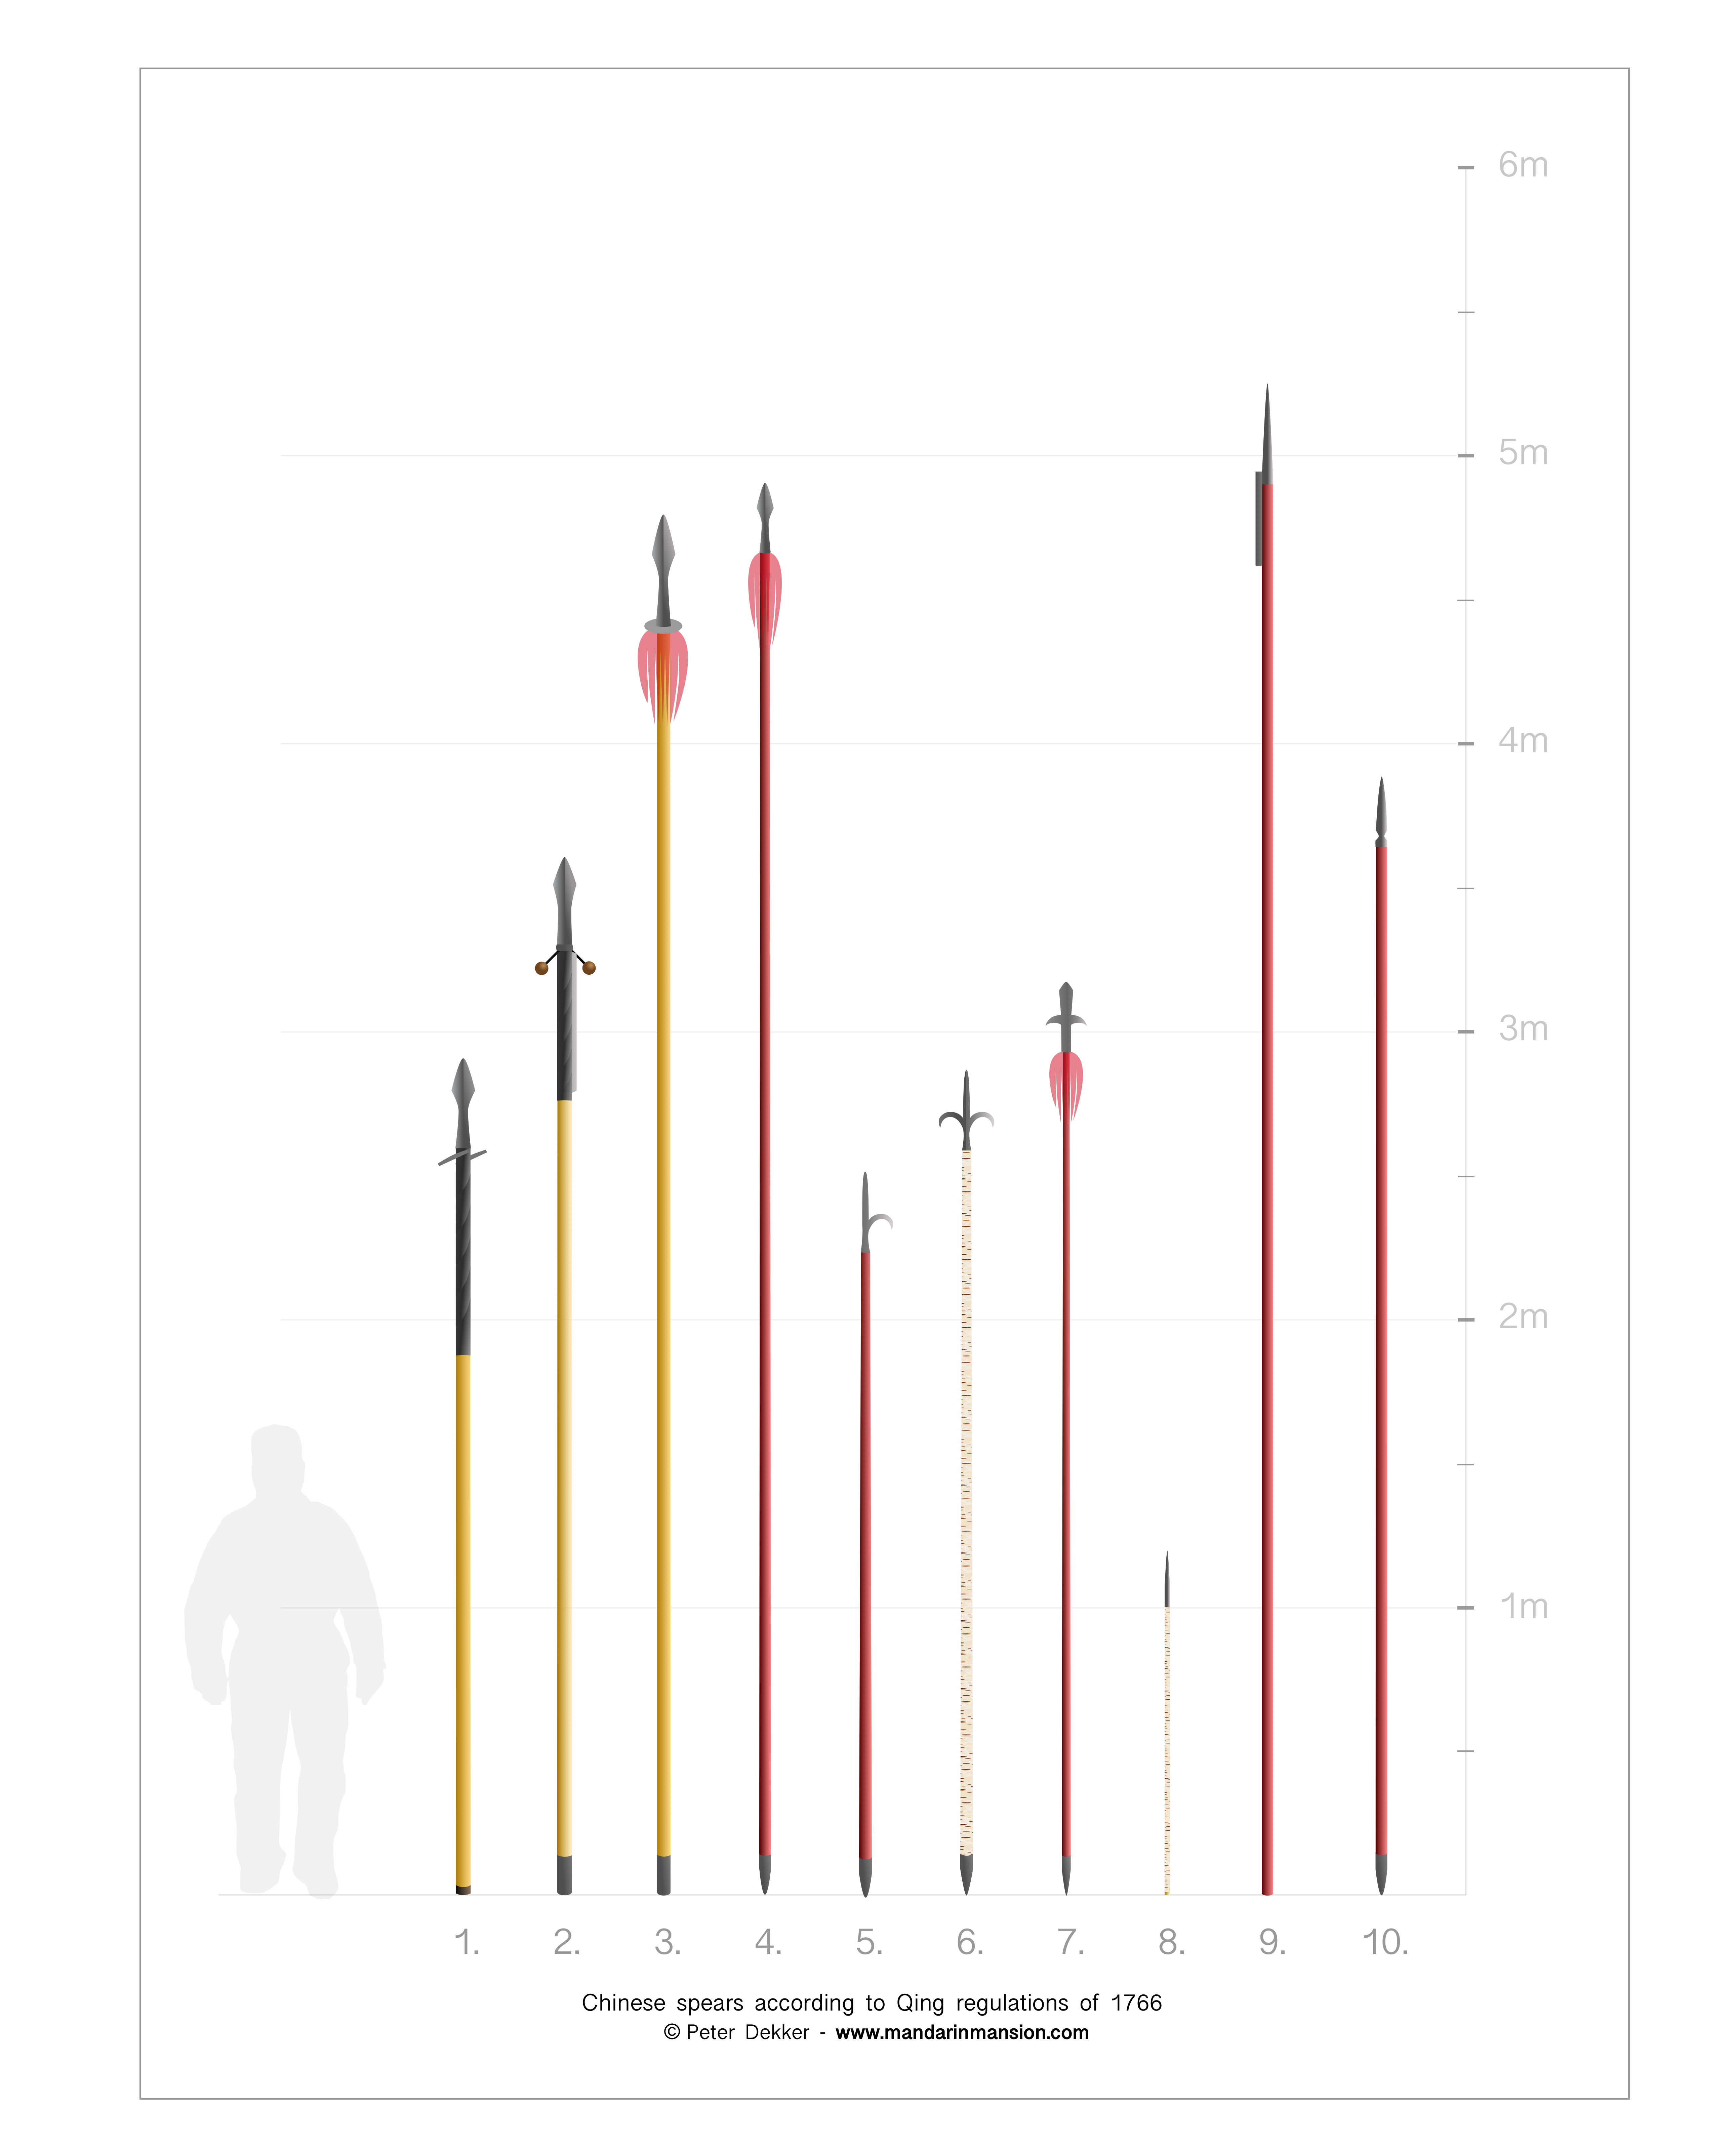 Visualization of spears of the Qing dynasty